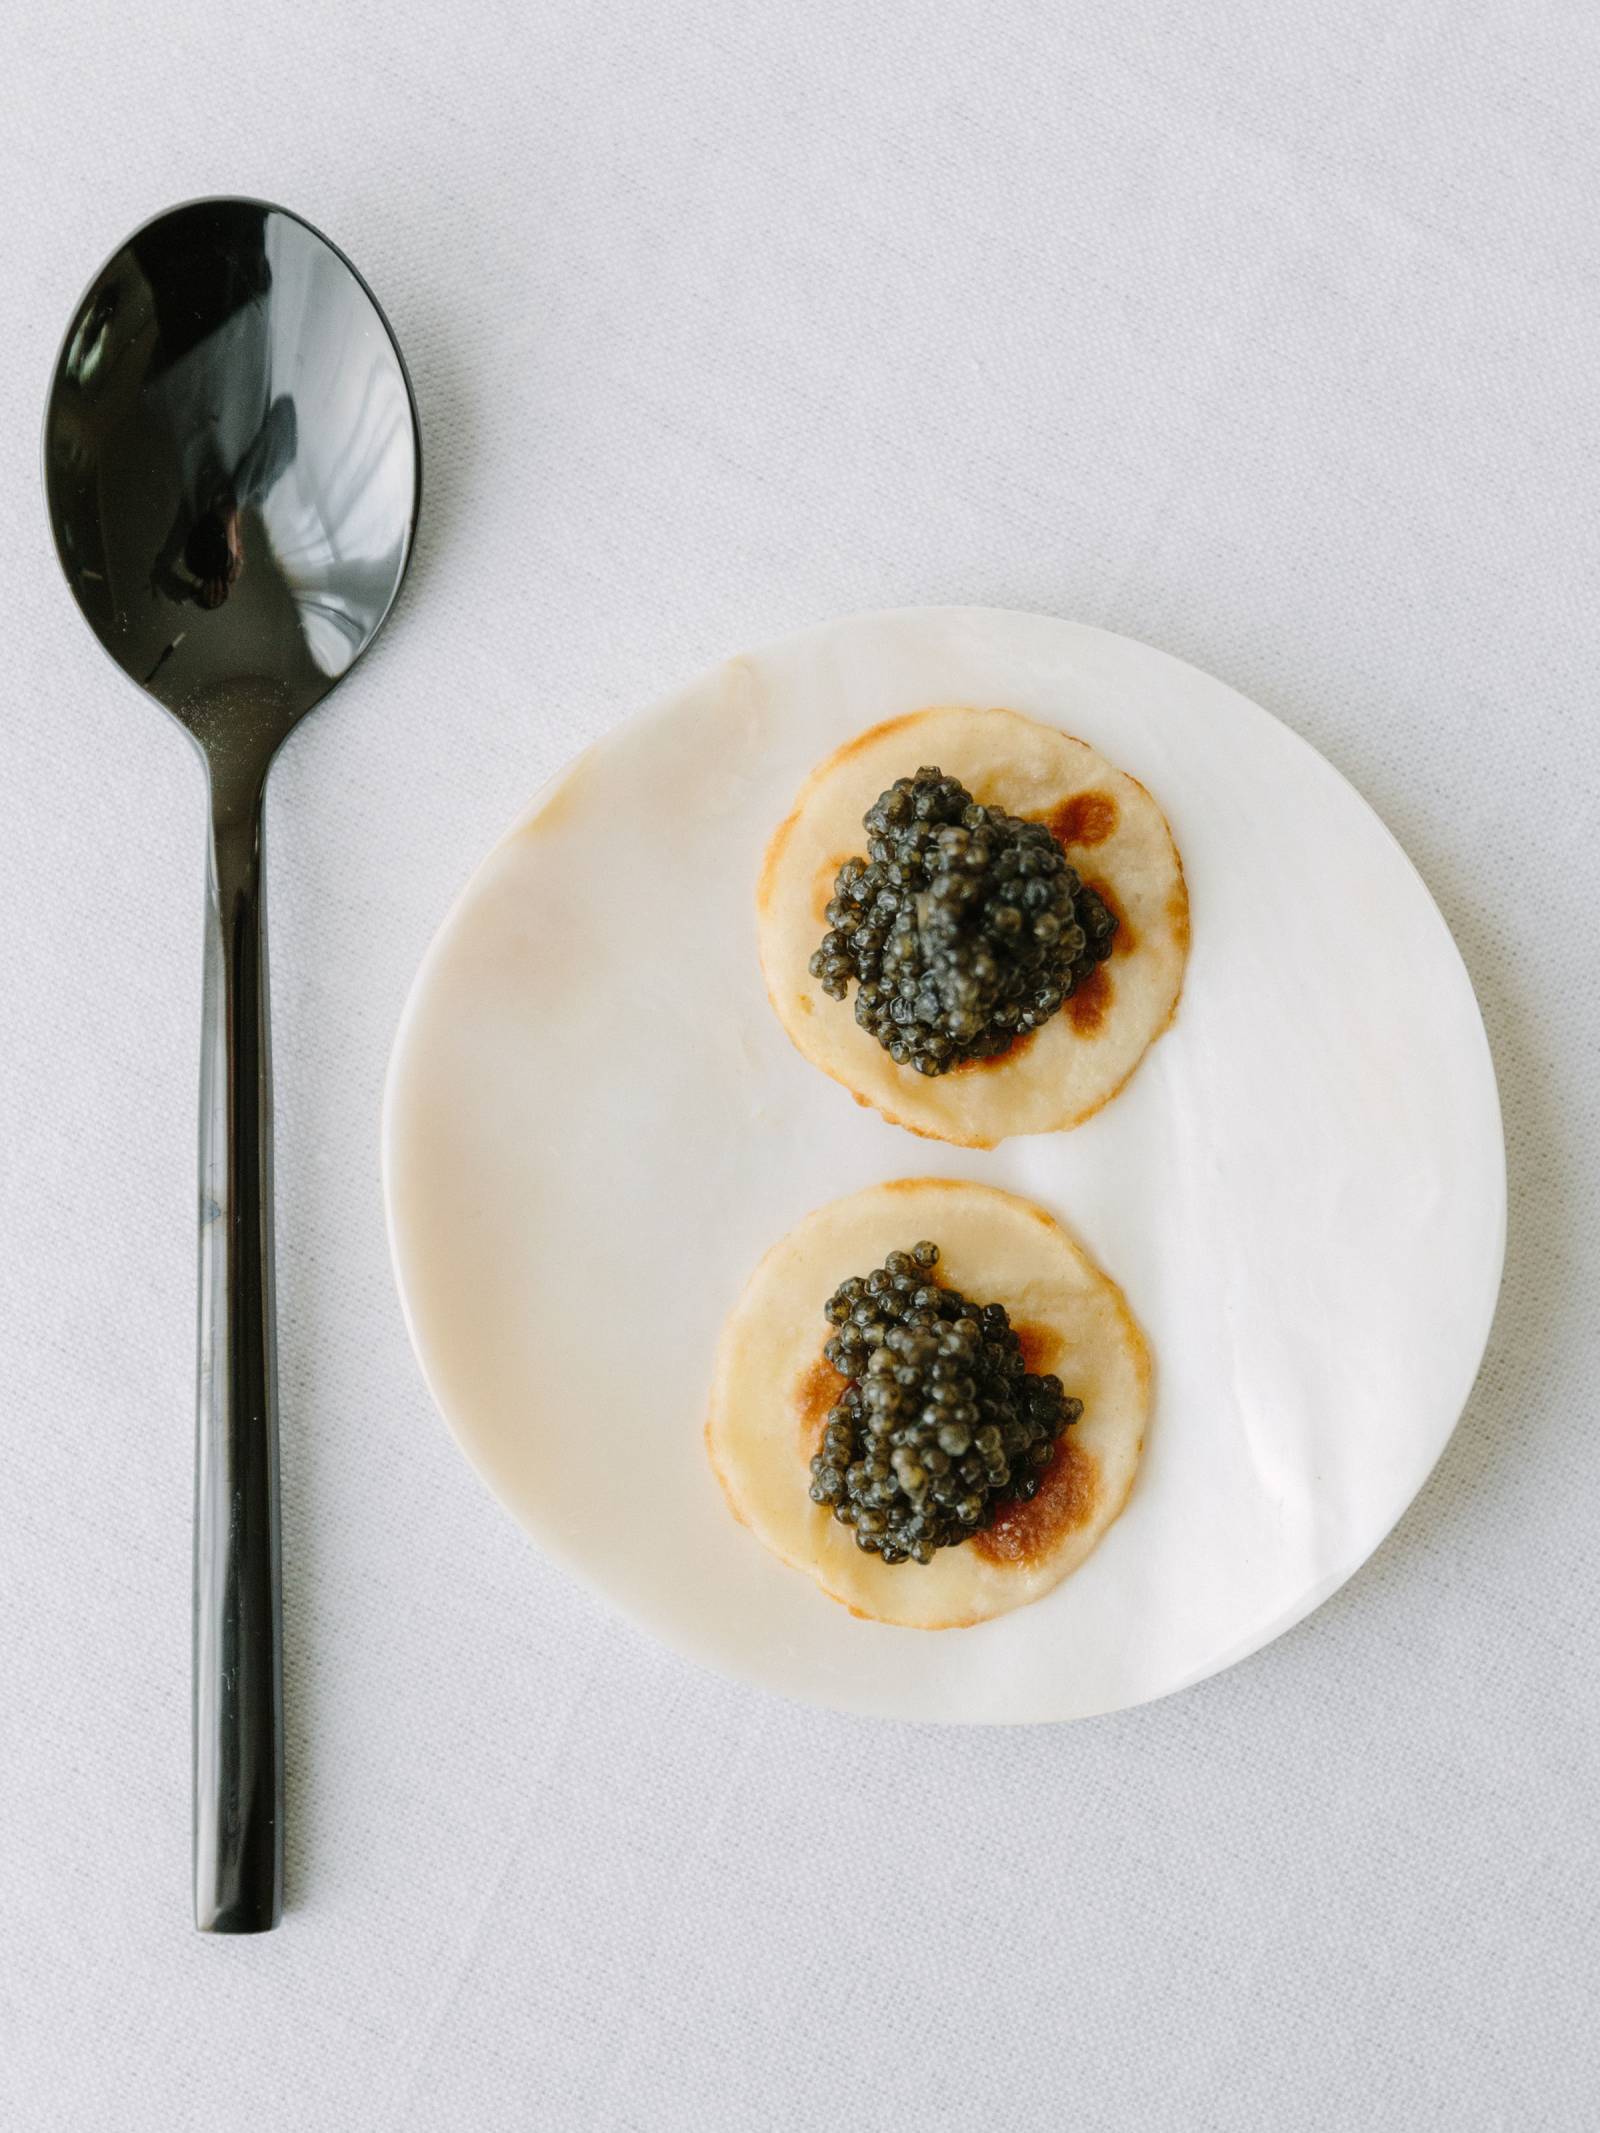 Black spoon next to white plate with caviar on blinis.